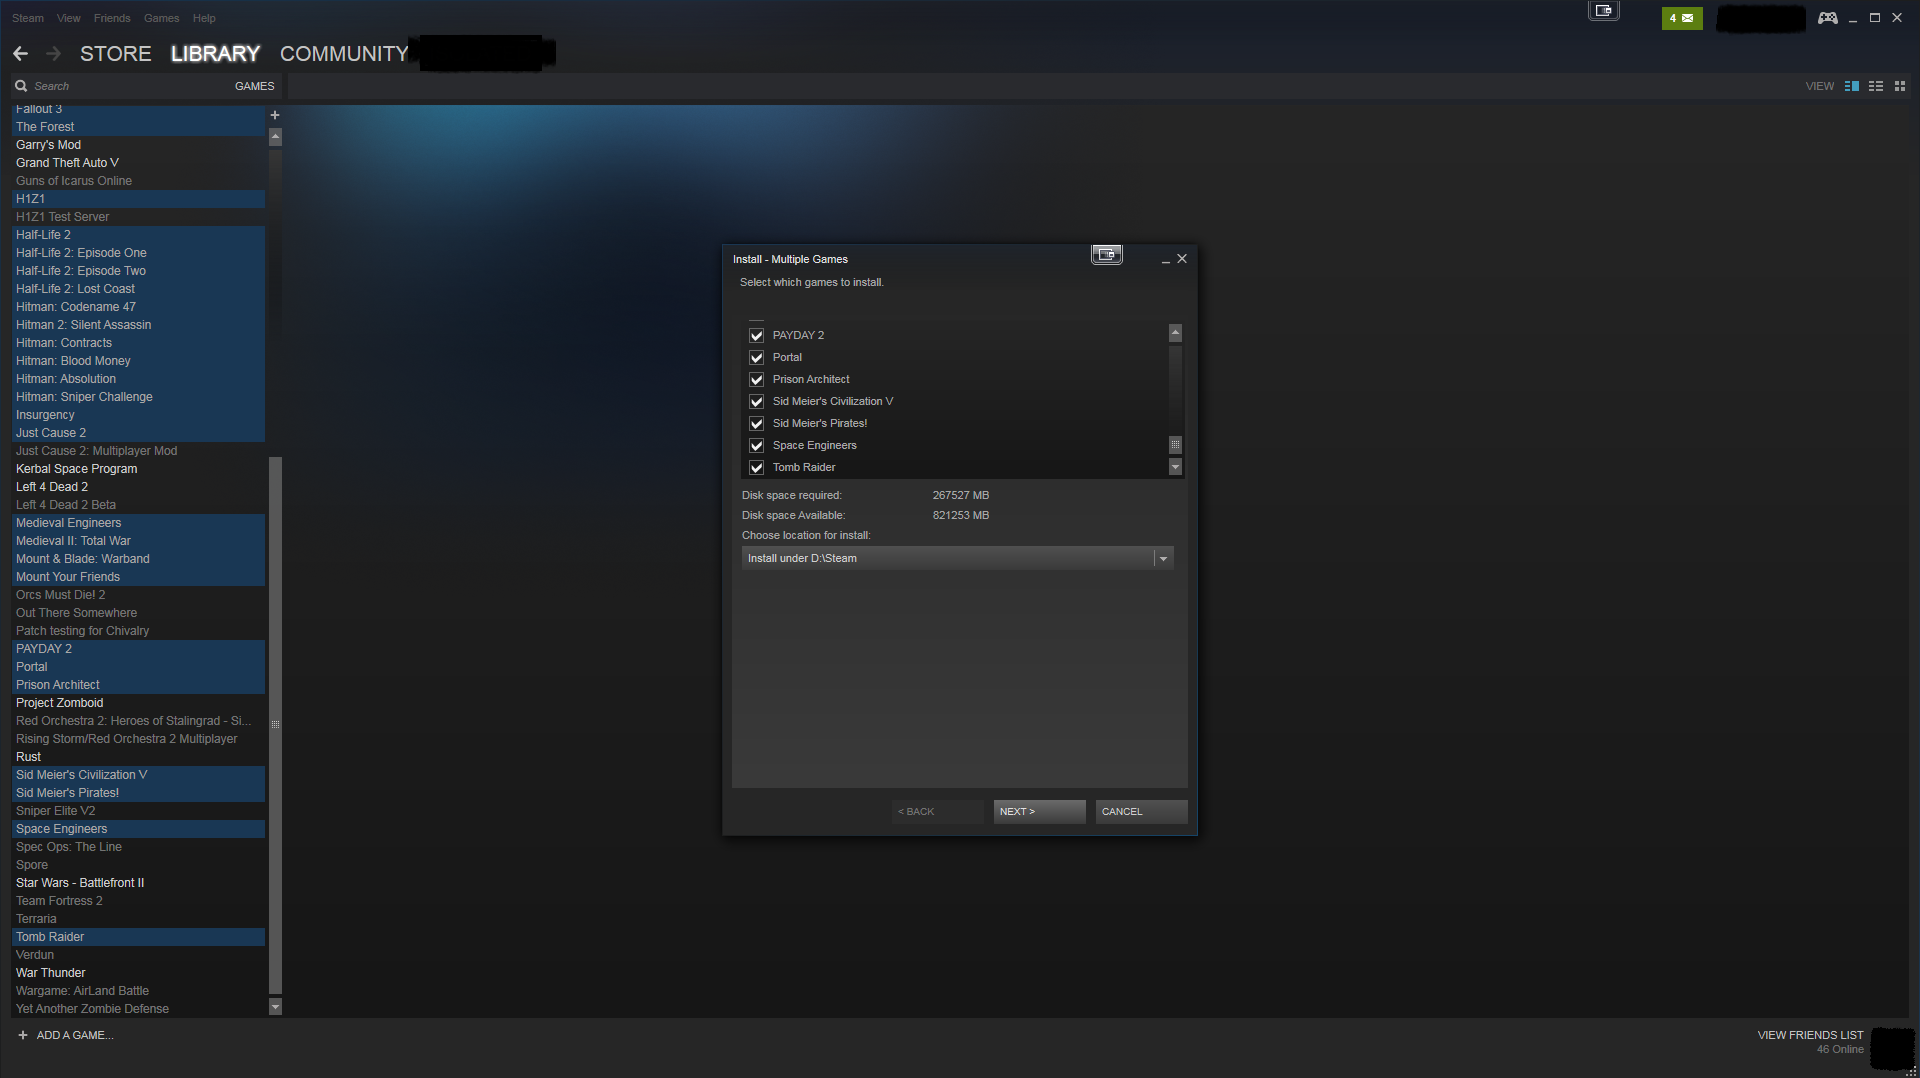 TIL you can install multiple steam games at once!